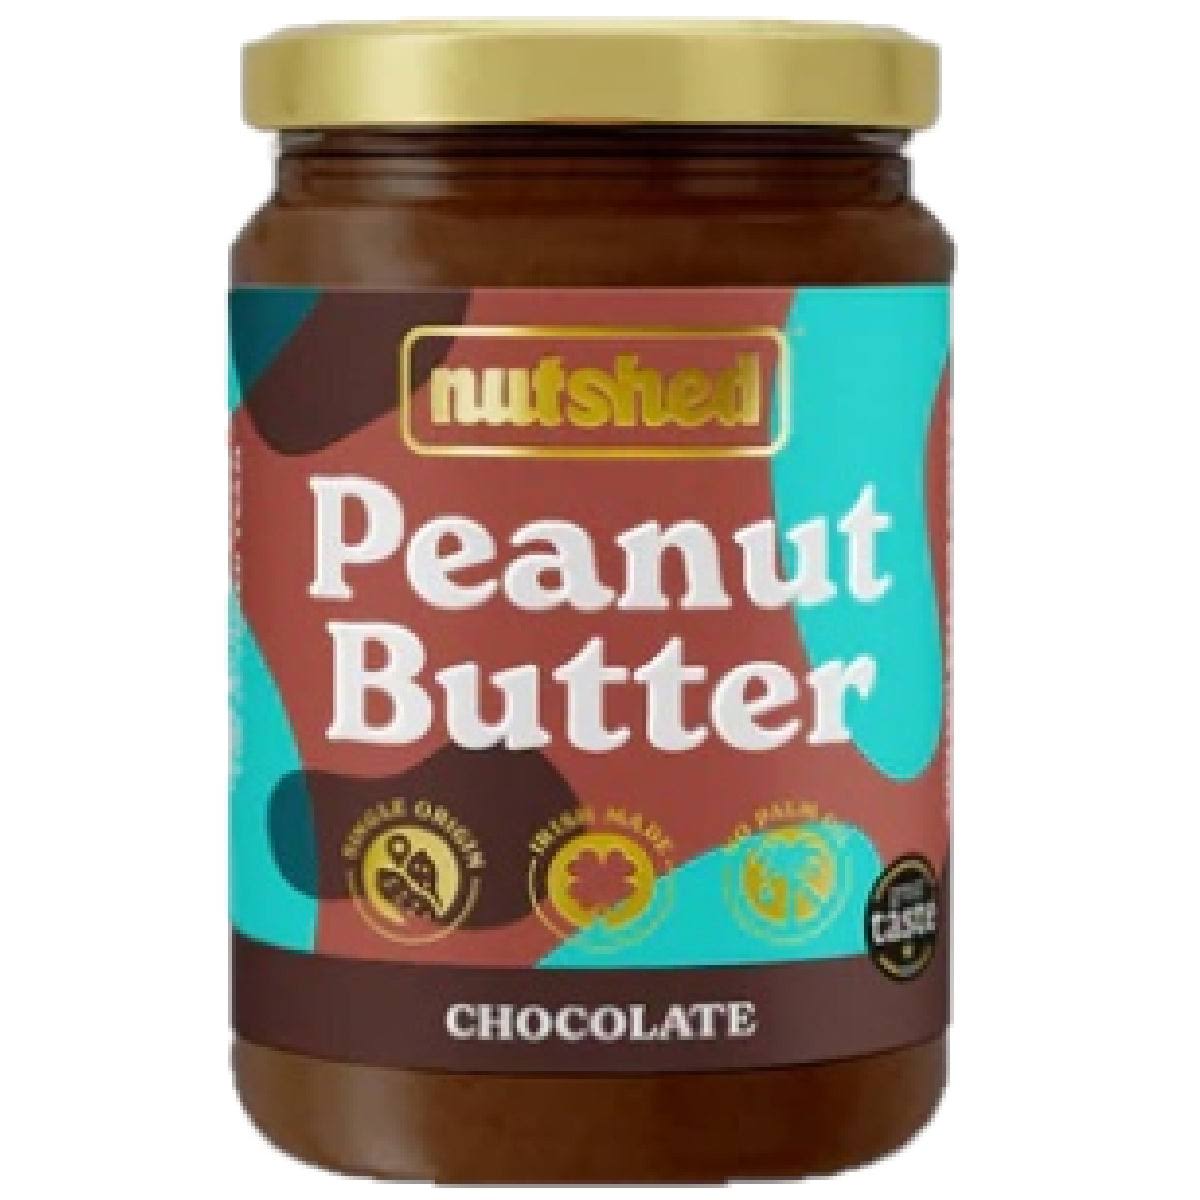 Nutshed Peanut Butter Chocolate - 290g